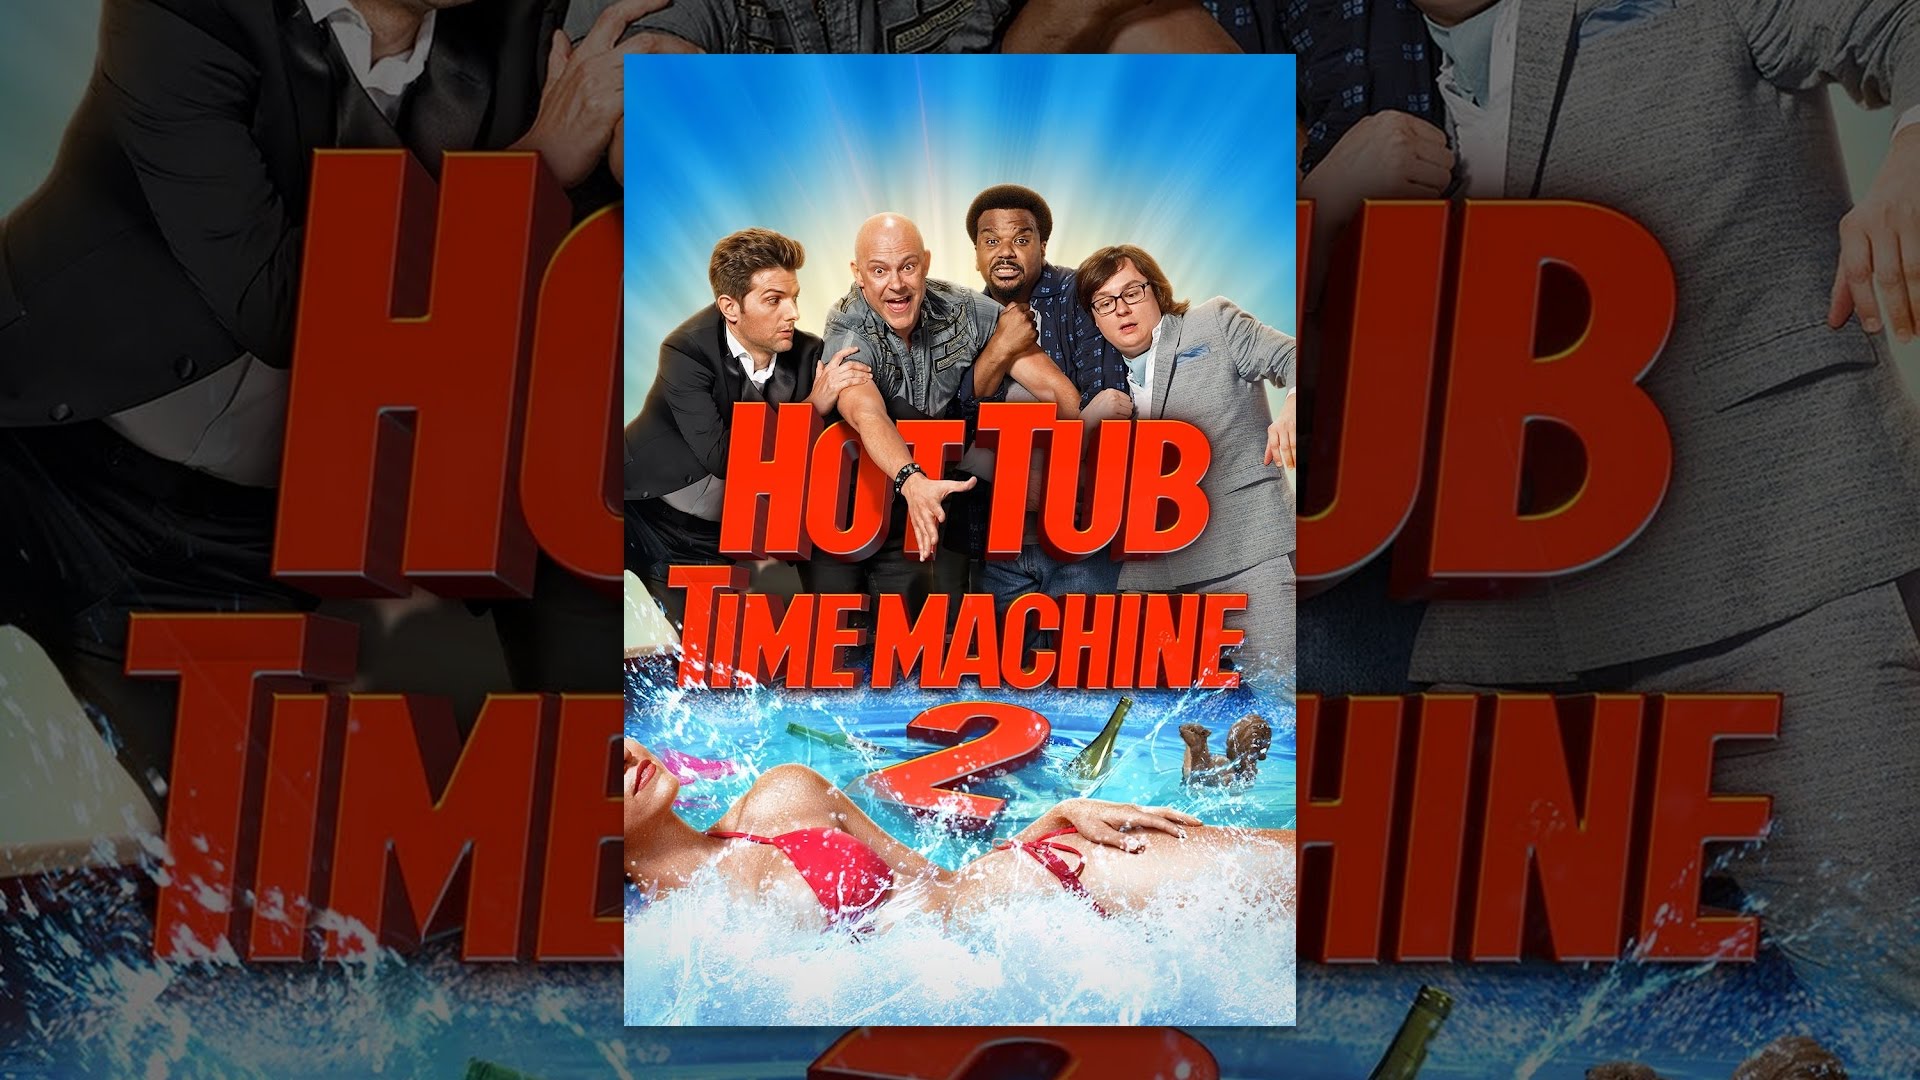 Where to watch hot tub time machine 2 for free